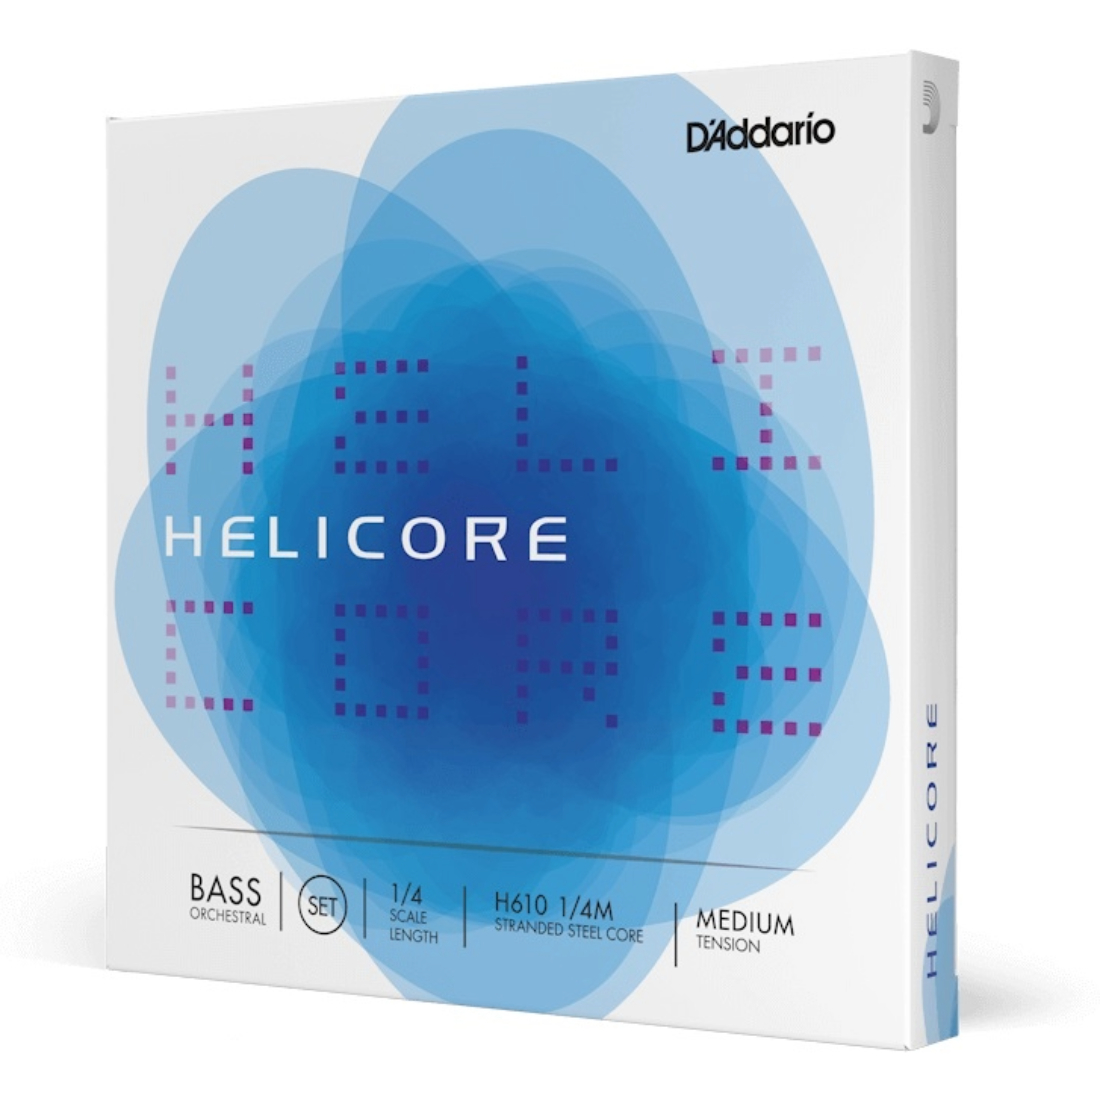 White and blue box of Helicore one fourth scale medium tension, single D string